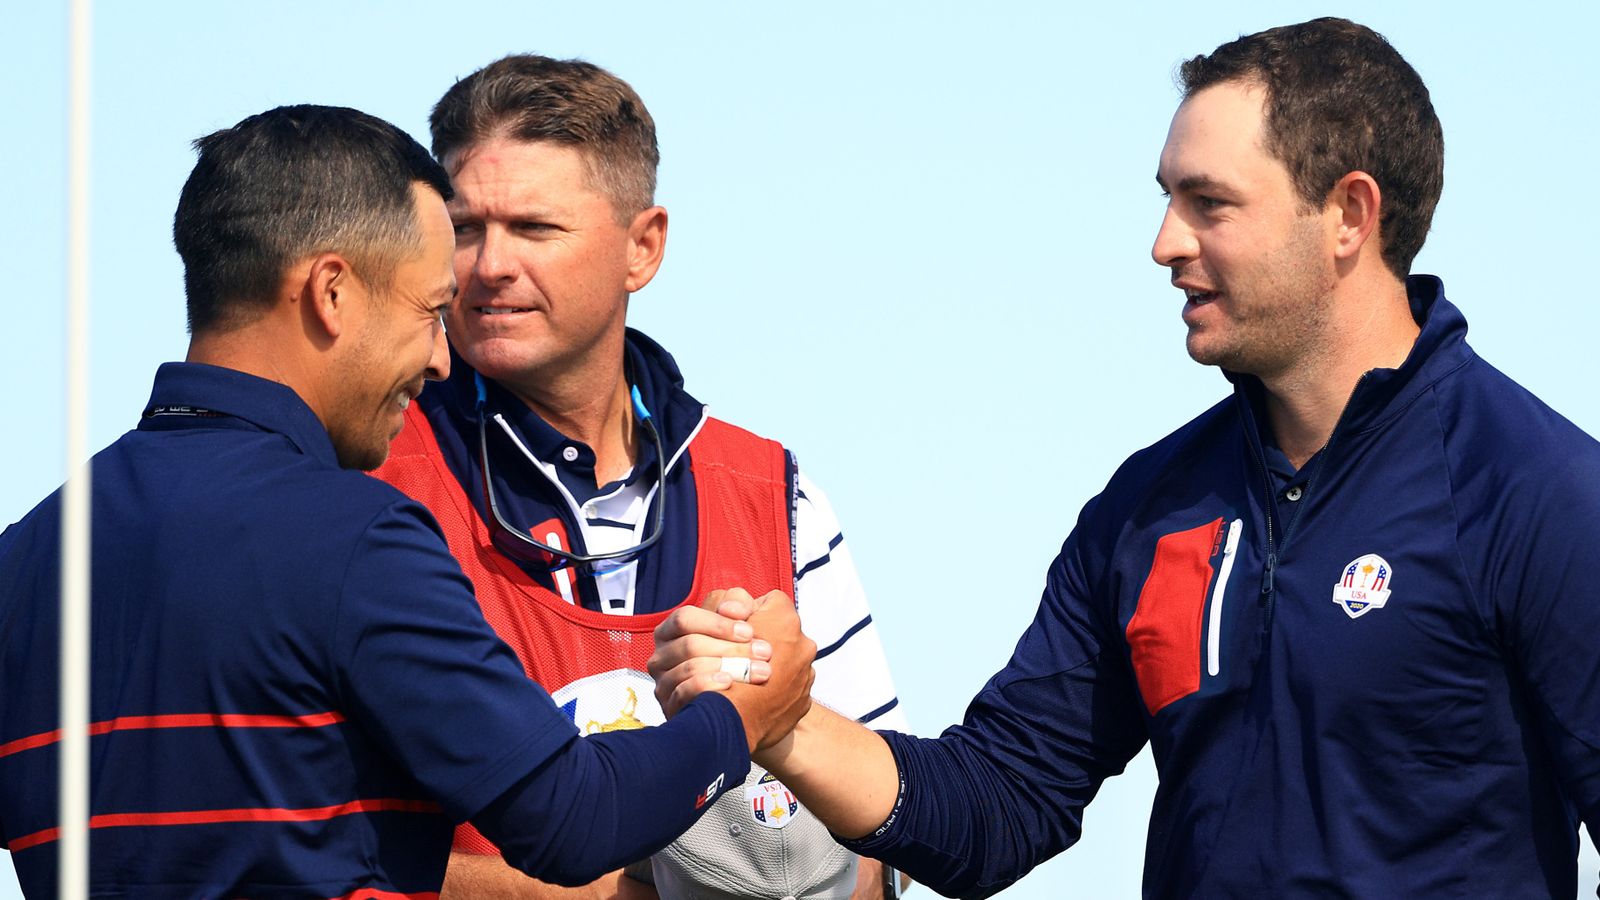 Ryder Cup 2020: Sergio Garcia and Jon Rahm win point before Team USA grab 3-1 lead in foursomes